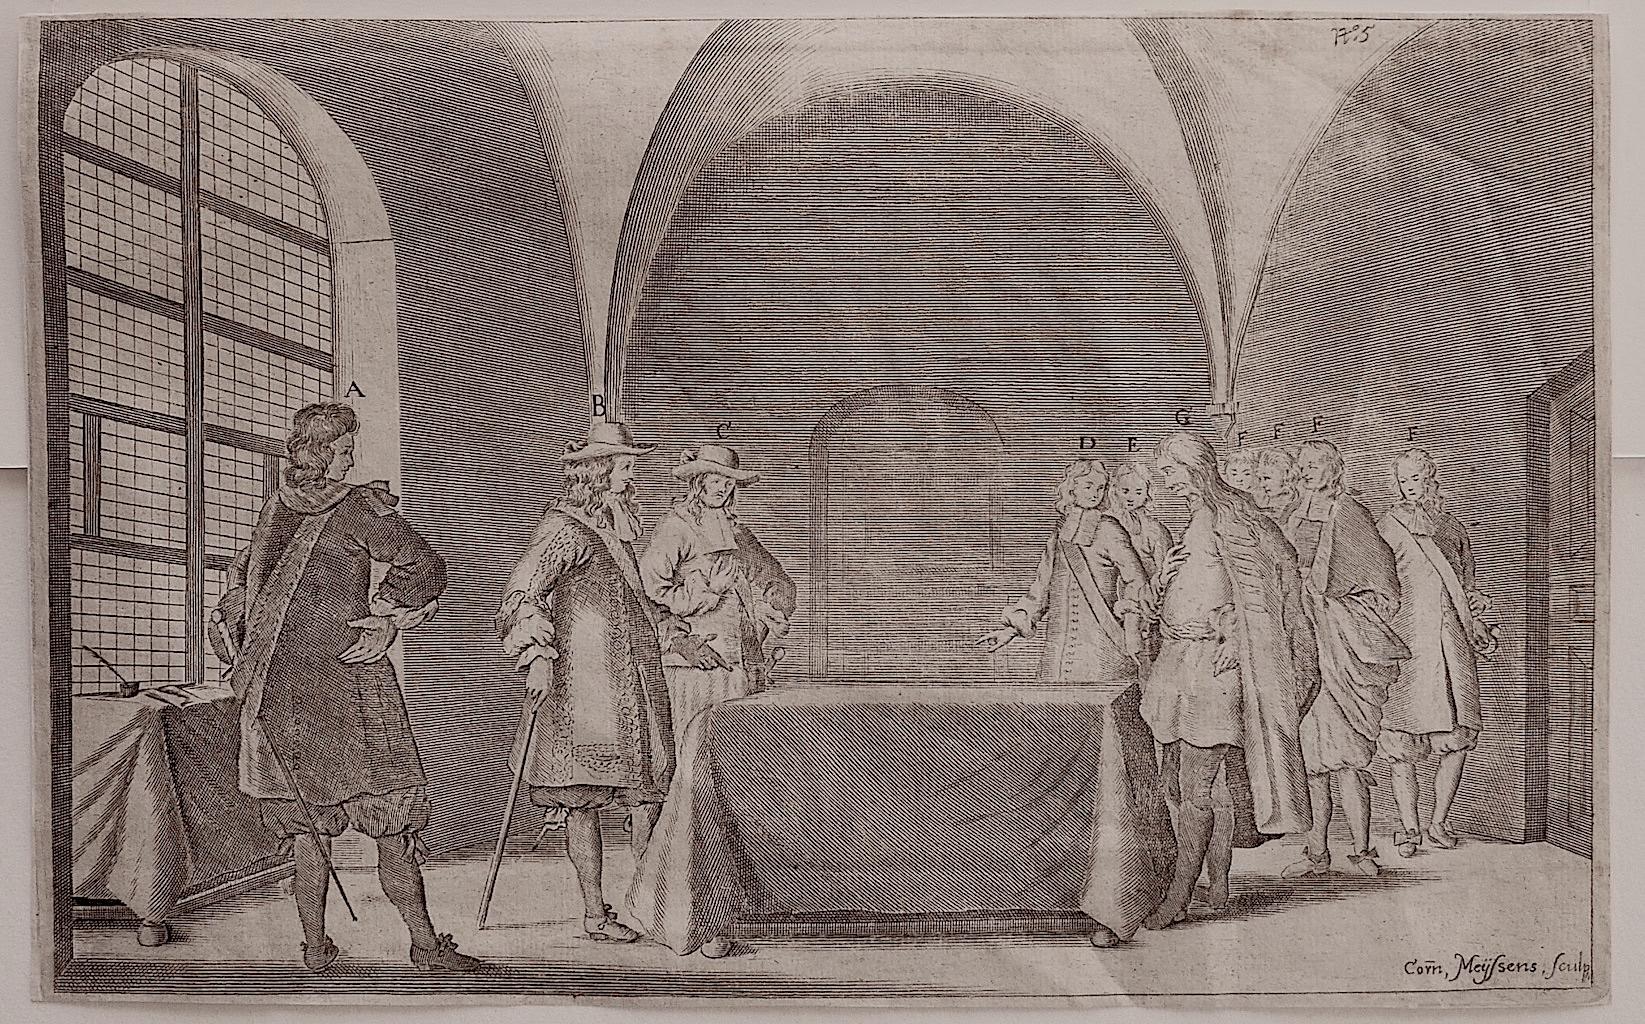 Interior Meeting is an original etching realized by Cornelis Meyssens ( 1640-1573).
Good conditions, except for some foldings.
Included a Passepartout: 34 x 49 cm

The artwork represents the interior meeting of men, depicted by mastery through